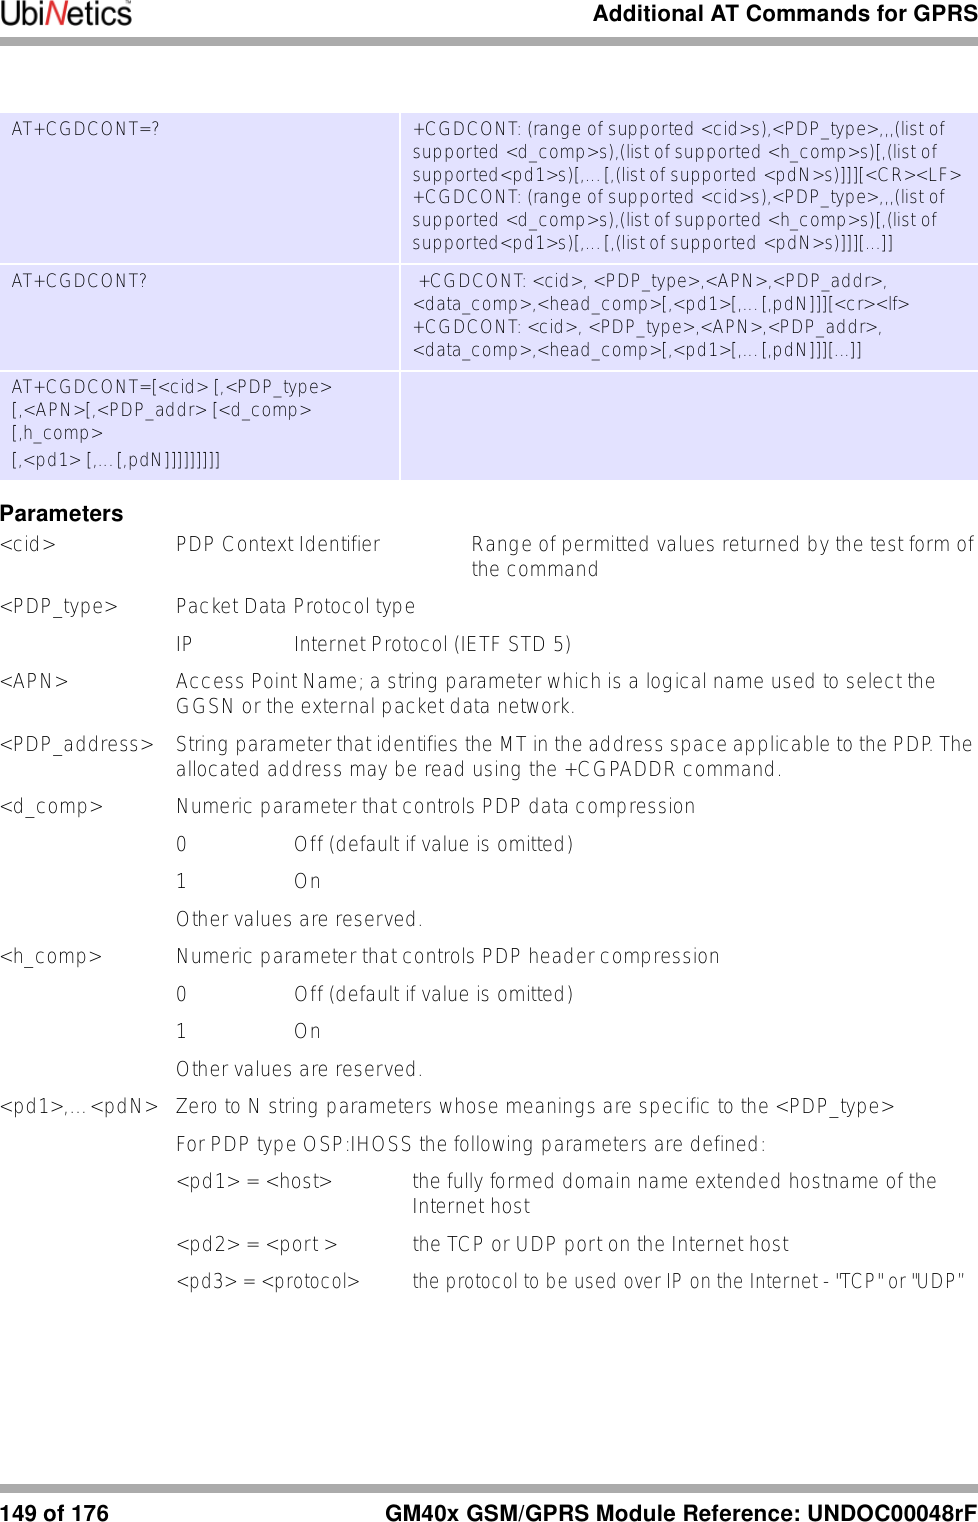 Additional AT Commands for GPRS149 of 176 GM40x GSM/GPRS Module Reference: UNDOC00048rFParameters&lt;cid&gt; PDP Context Identifier Range of permitted values returned by the test form of the command&lt;PDP_type&gt; Packet Data Protocol typeIP  Internet Protocol (IETF STD 5)&lt;APN&gt; Access Point Name; a string parameter which is a logical name used to select the GGSN or the external packet data network.&lt;PDP_address&gt; String parameter that identifies the MT in the address space applicable to the PDP. The allocated address may be read using the +CGPADDR command.&lt;d_comp&gt; Numeric parameter that controls PDP data compression0 Off (default if value is omitted)1OnOther values are reserved.&lt;h_comp&gt; Numeric parameter that controls PDP header compression0  Off (default if value is omitted)1OnOther values are reserved.&lt;pd1&gt;,…&lt;pdN&gt; Zero to N string parameters whose meanings are specific to the &lt;PDP_type&gt;For PDP type OSP:IHOSS the following parameters are defined:&lt;pd1&gt; = &lt;host&gt;  the fully formed domain name extended hostname of the Internet host&lt;pd2&gt; = &lt;port &gt;  the TCP or UDP port on the Internet host&lt;pd3&gt; = &lt;protocol&gt;  the protocol to be used over IP on the Internet - &quot;TCP&quot; or &quot;UDP”AT+CGDCONT=?  +CGDCONT: (range of supported &lt;cid&gt;s),&lt;PDP_type&gt;,,,(list of supported &lt;d_comp&gt;s),(list of supported &lt;h_comp&gt;s)[,(list of supported&lt;pd1&gt;s)[,…[,(list of supported &lt;pdN&gt;s)]]][&lt;CR&gt;&lt;LF&gt;+CGDCONT: (range of supported &lt;cid&gt;s),&lt;PDP_type&gt;,,,(list of supported &lt;d_comp&gt;s),(list of supported &lt;h_comp&gt;s)[,(list of supported&lt;pd1&gt;s)[,…[,(list of supported &lt;pdN&gt;s)]]][...]]AT+CGDCONT?  +CGDCONT: &lt;cid&gt;, &lt;PDP_type&gt;,&lt;APN&gt;,&lt;PDP_addr&gt;, &lt;data_comp&gt;,&lt;head_comp&gt;[,&lt;pd1&gt;[,…[,pdN]]][&lt;cr&gt;&lt;lf&gt;+CGDCONT: &lt;cid&gt;, &lt;PDP_type&gt;,&lt;APN&gt;,&lt;PDP_addr&gt;, &lt;data_comp&gt;,&lt;head_comp&gt;[,&lt;pd1&gt;[,…[,pdN]]][...]]AT+CGDCONT=[&lt;cid&gt; [,&lt;PDP_type&gt; [,&lt;APN&gt;[,&lt;PDP_addr&gt; [&lt;d_comp&gt; [,h_comp&gt;[,&lt;pd1&gt; [,…[,pdN]]]]]]]]]